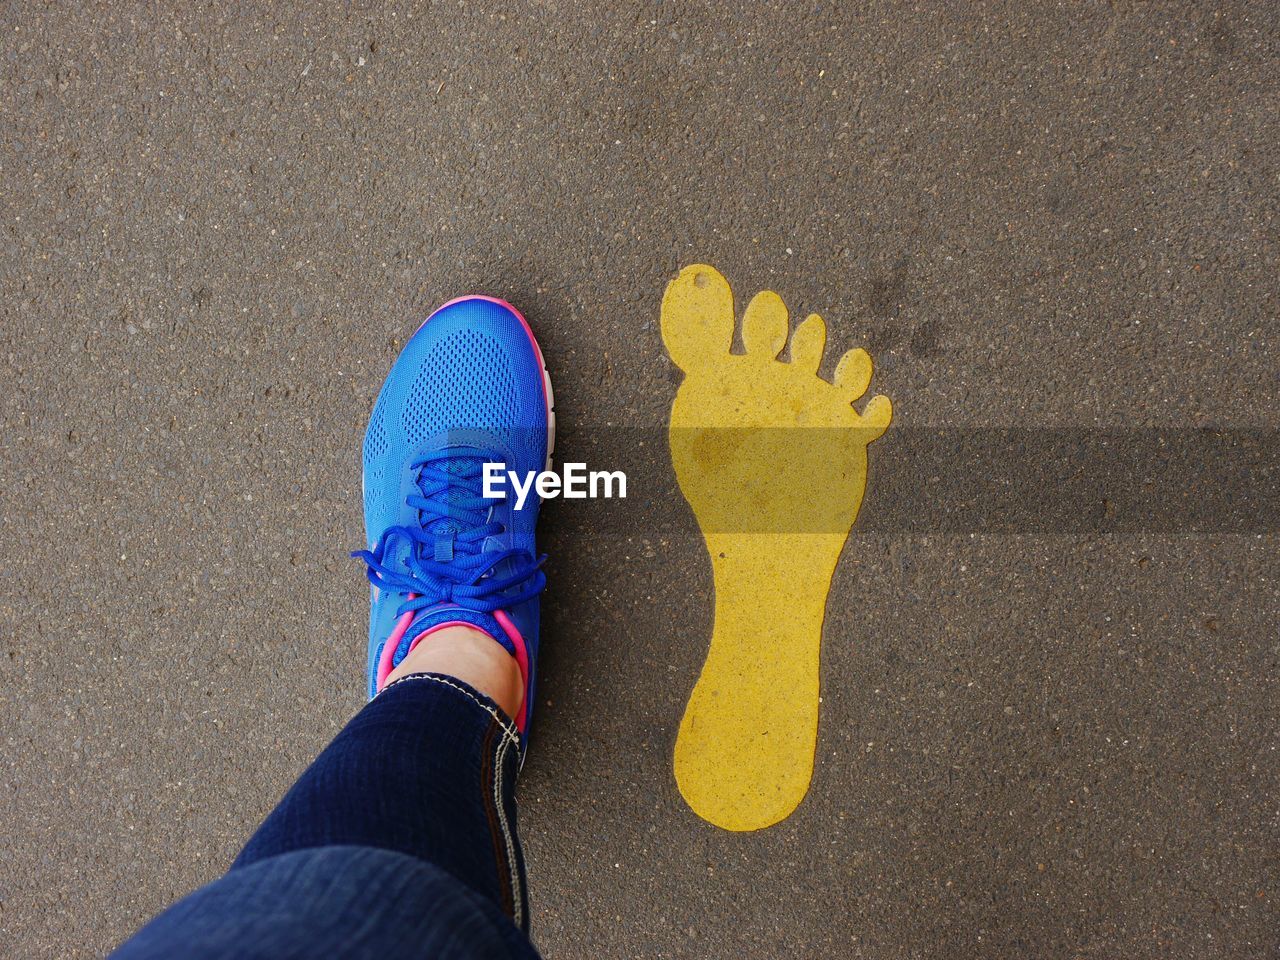 Low section view of person standing on footprint